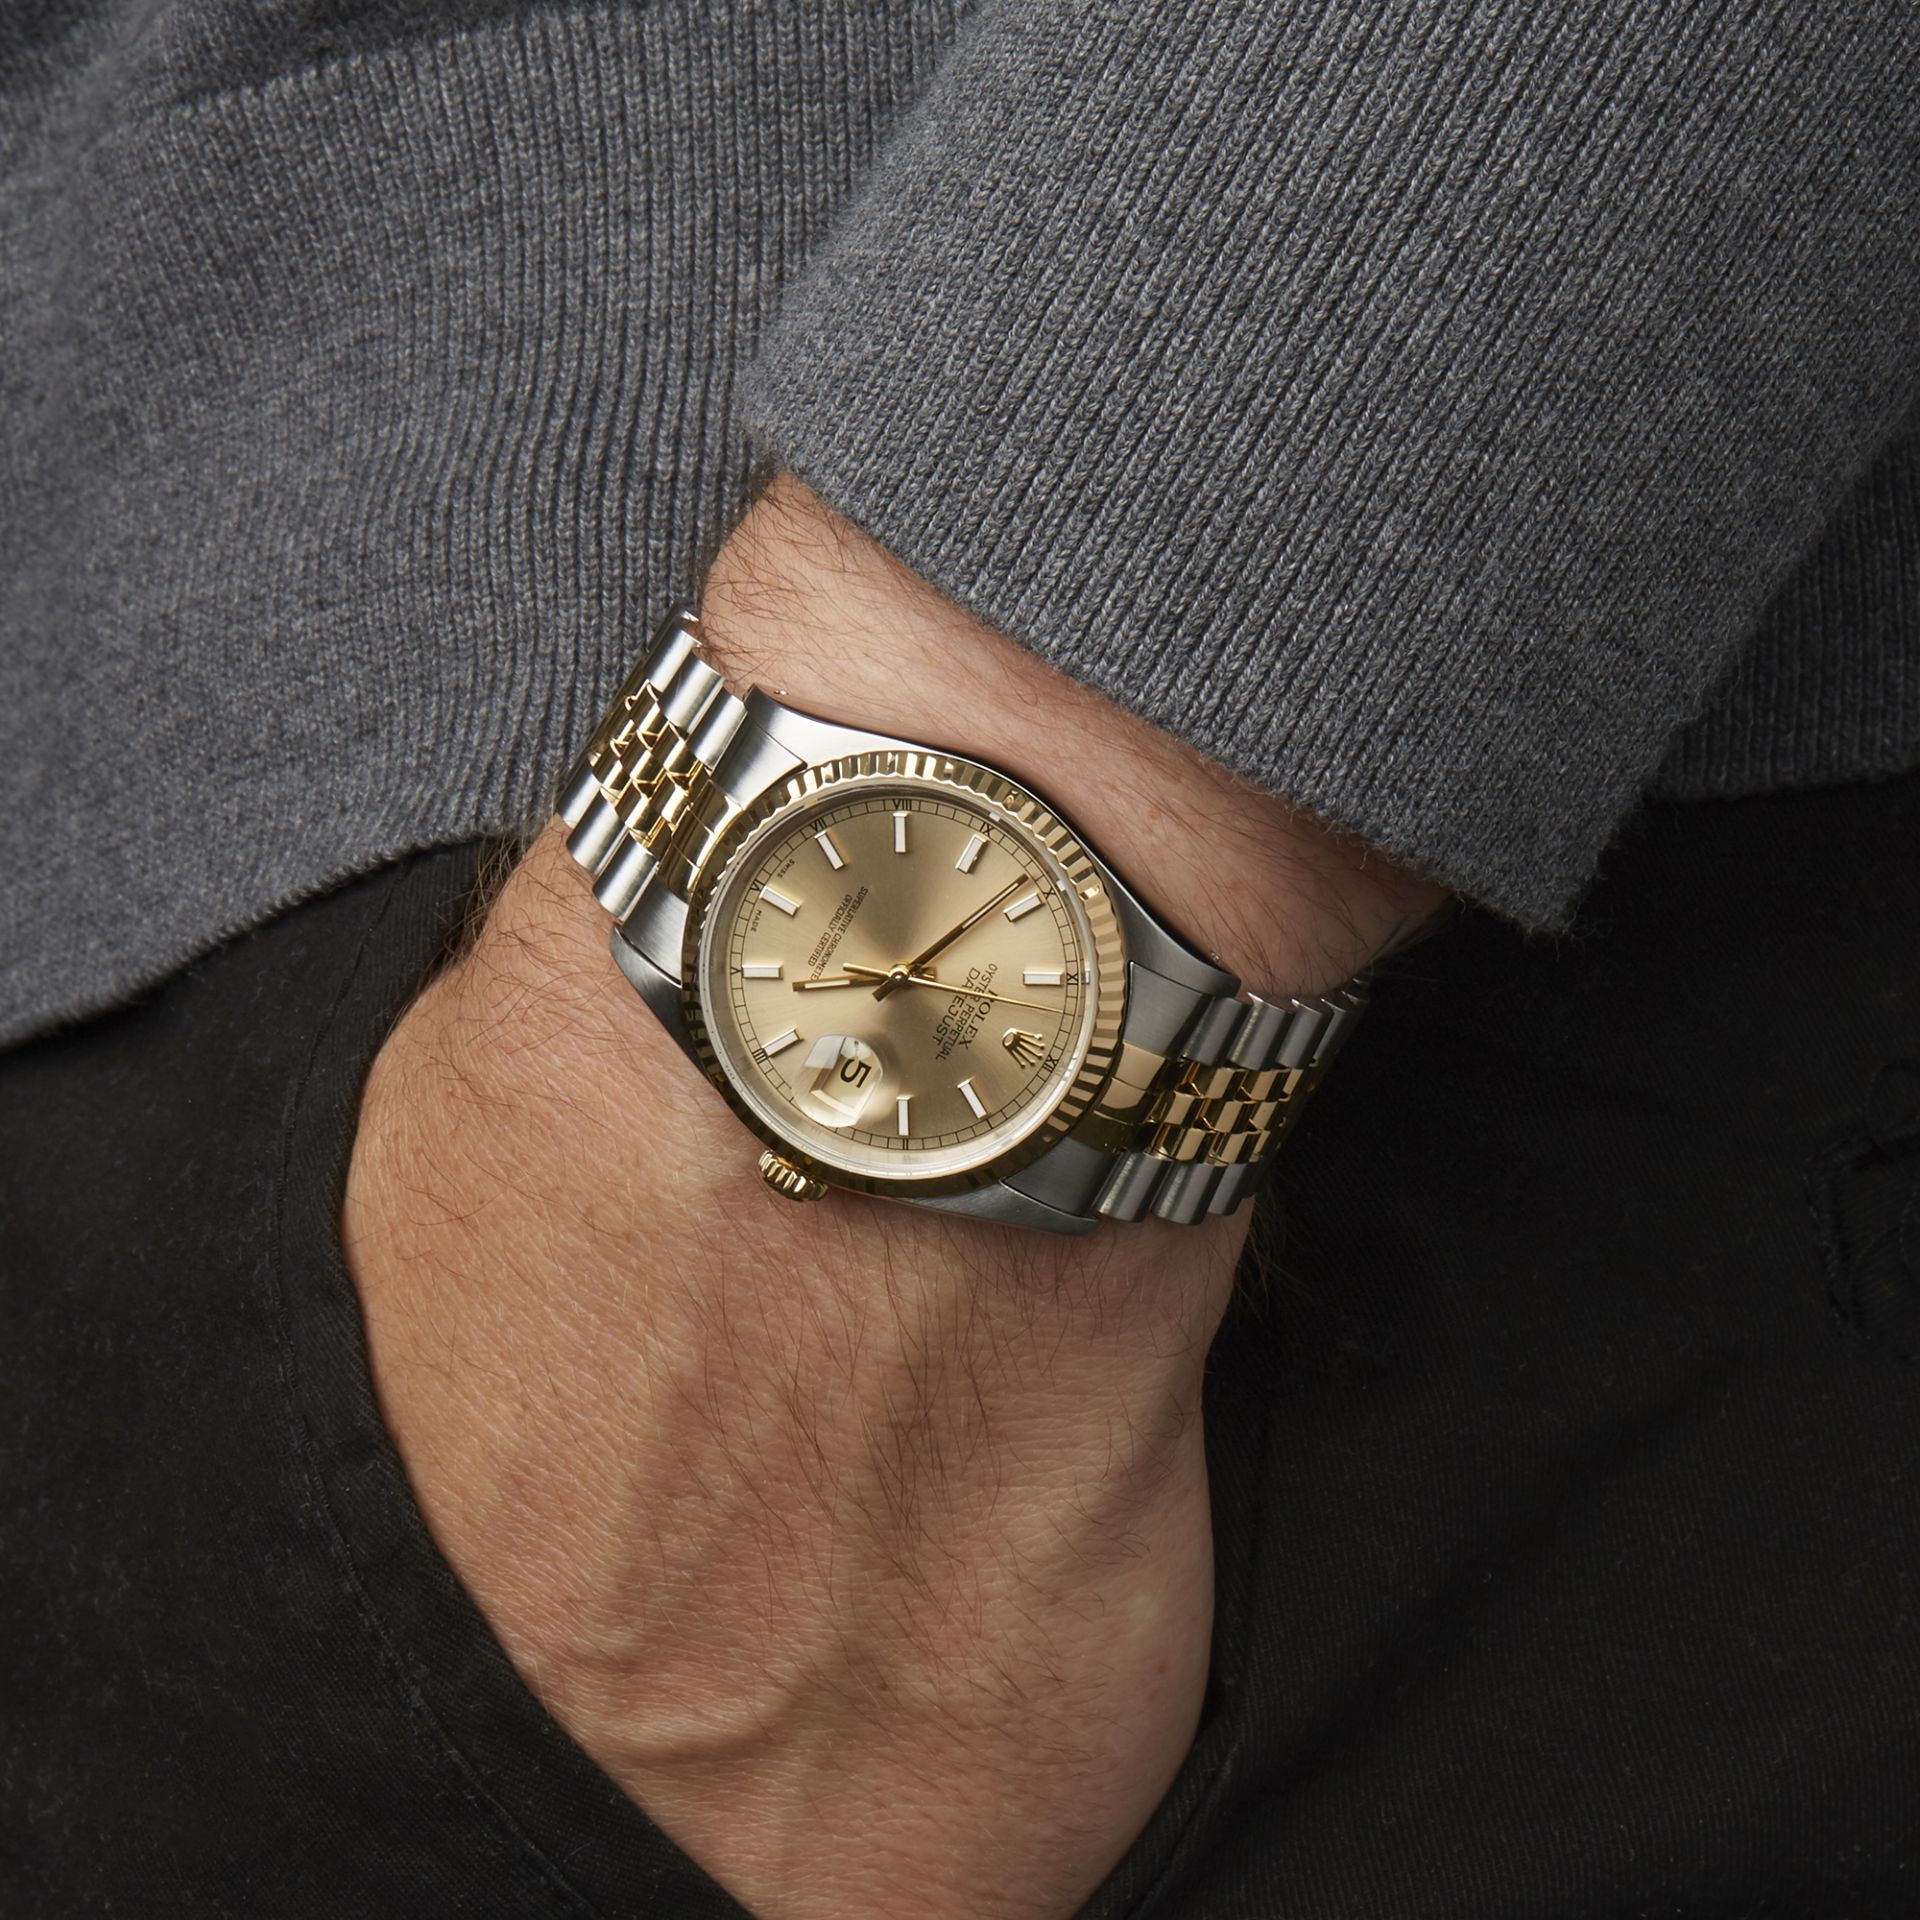 1991 DateJust 36 Stainless Steel & Yellow Gold - 16233 - Image 2 of 6